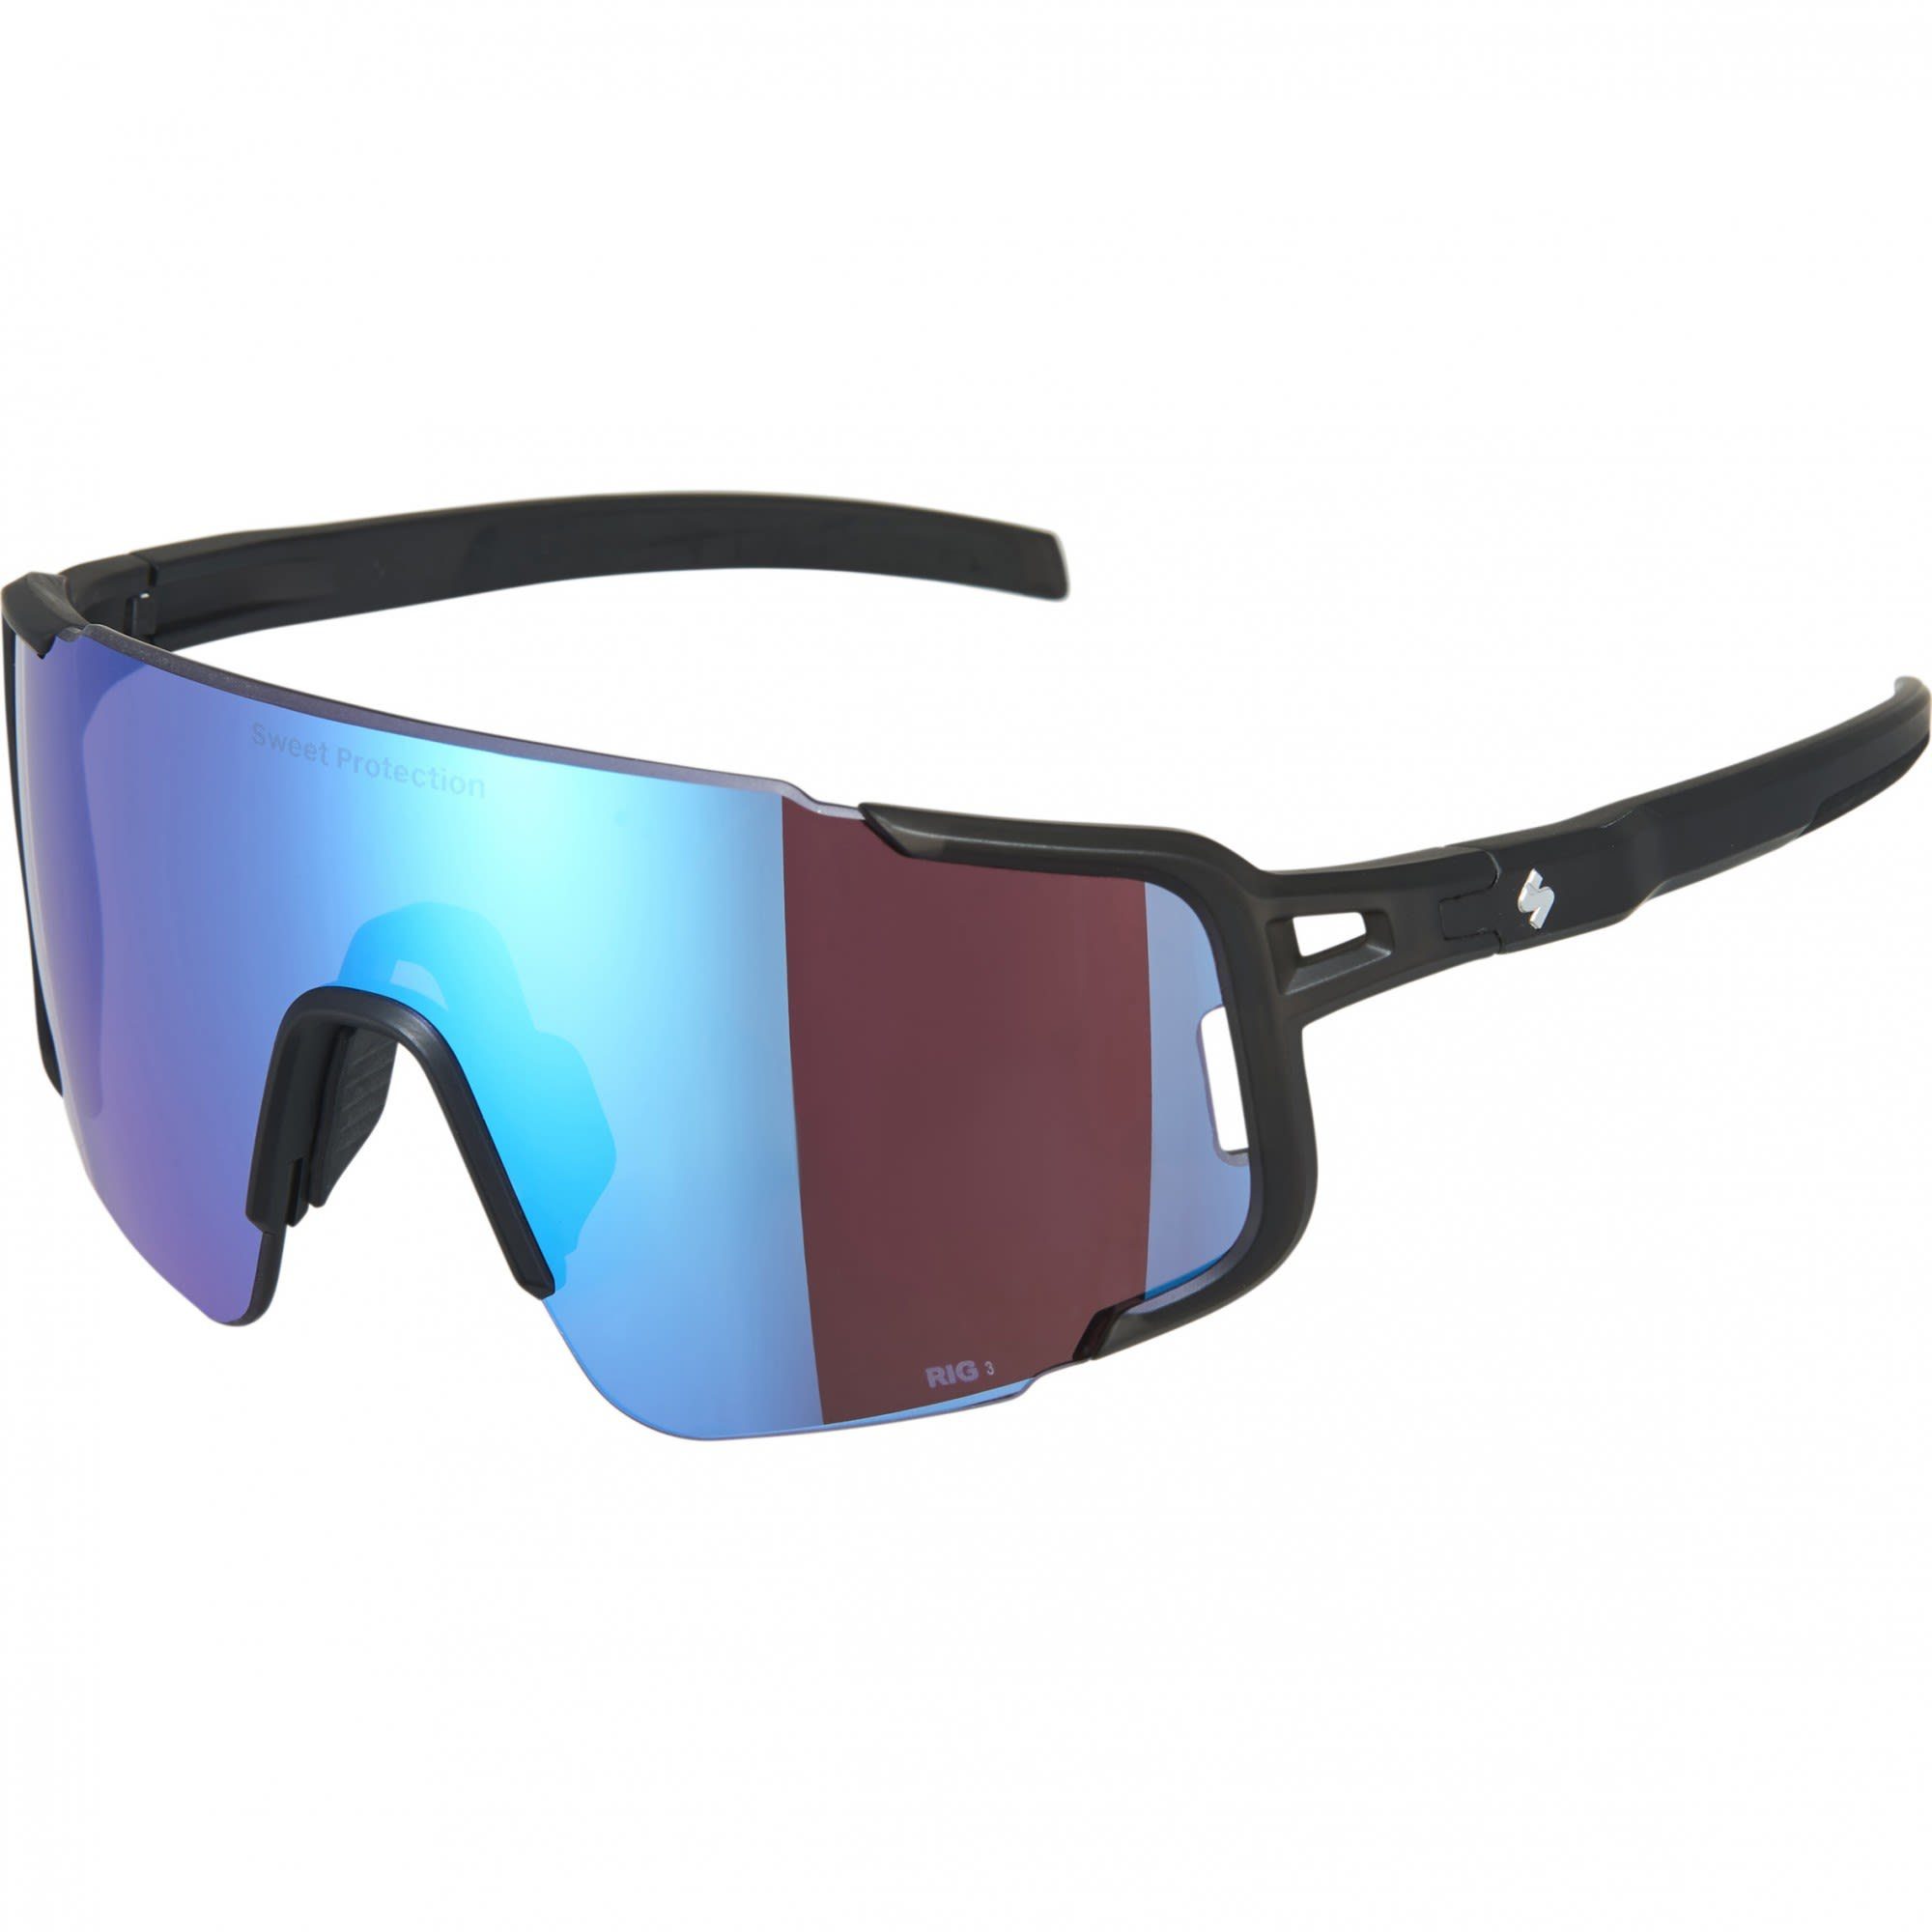 Crystal Accessoires Rig Max Protection Reflect Aquamarine Fahrradbrille Matte Sweet RIG Ronin Protection - Black Sweet